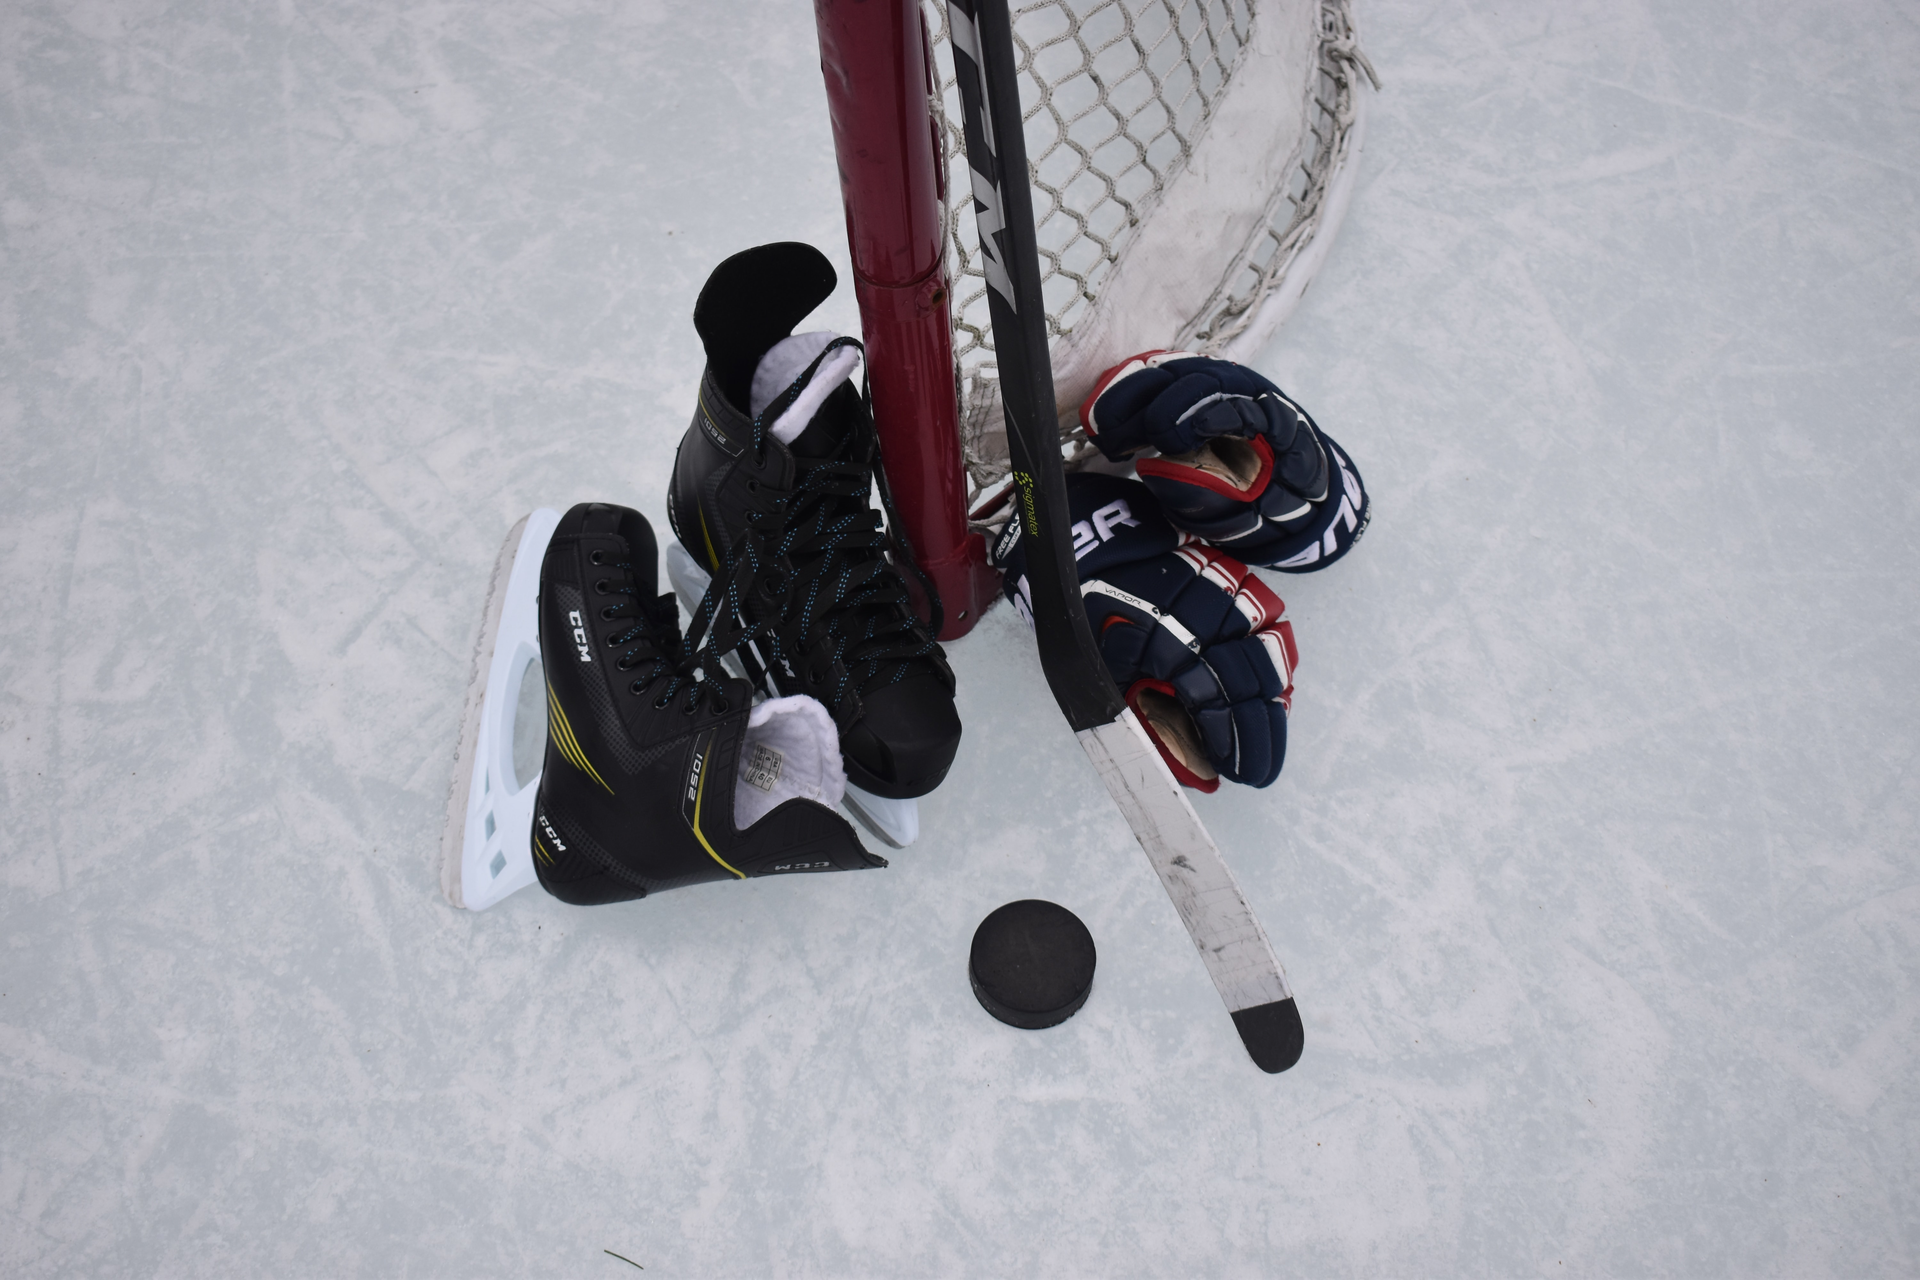 Youth Hockey Coach Charged With Assault For Hitting Player Athletic Business